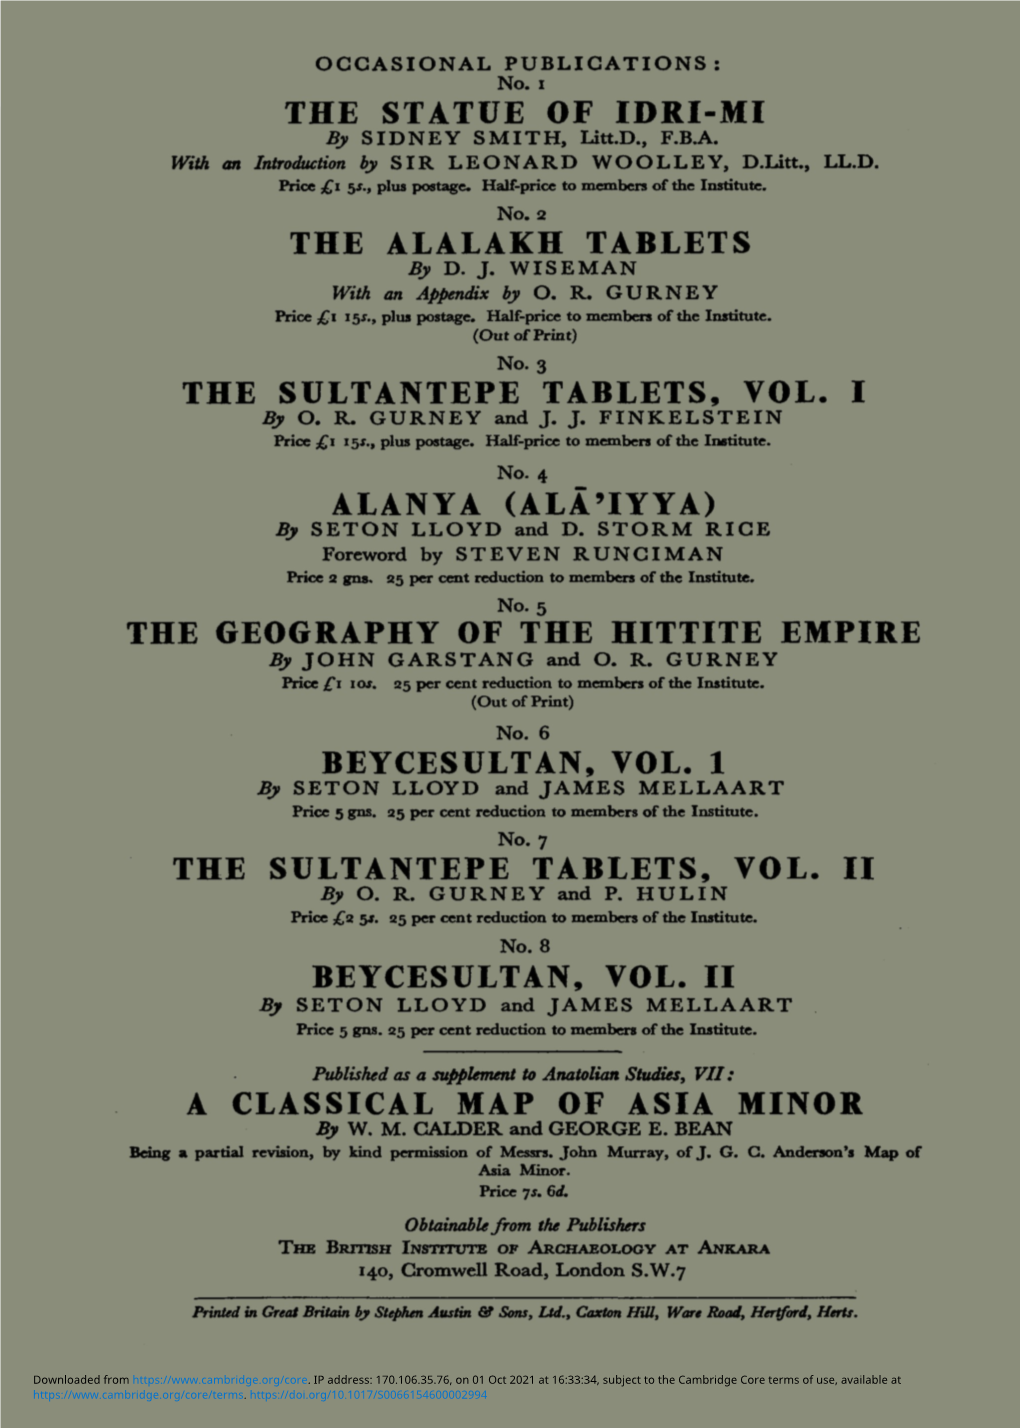 THE SULTANTEPE TABLETS, VOL. II by O